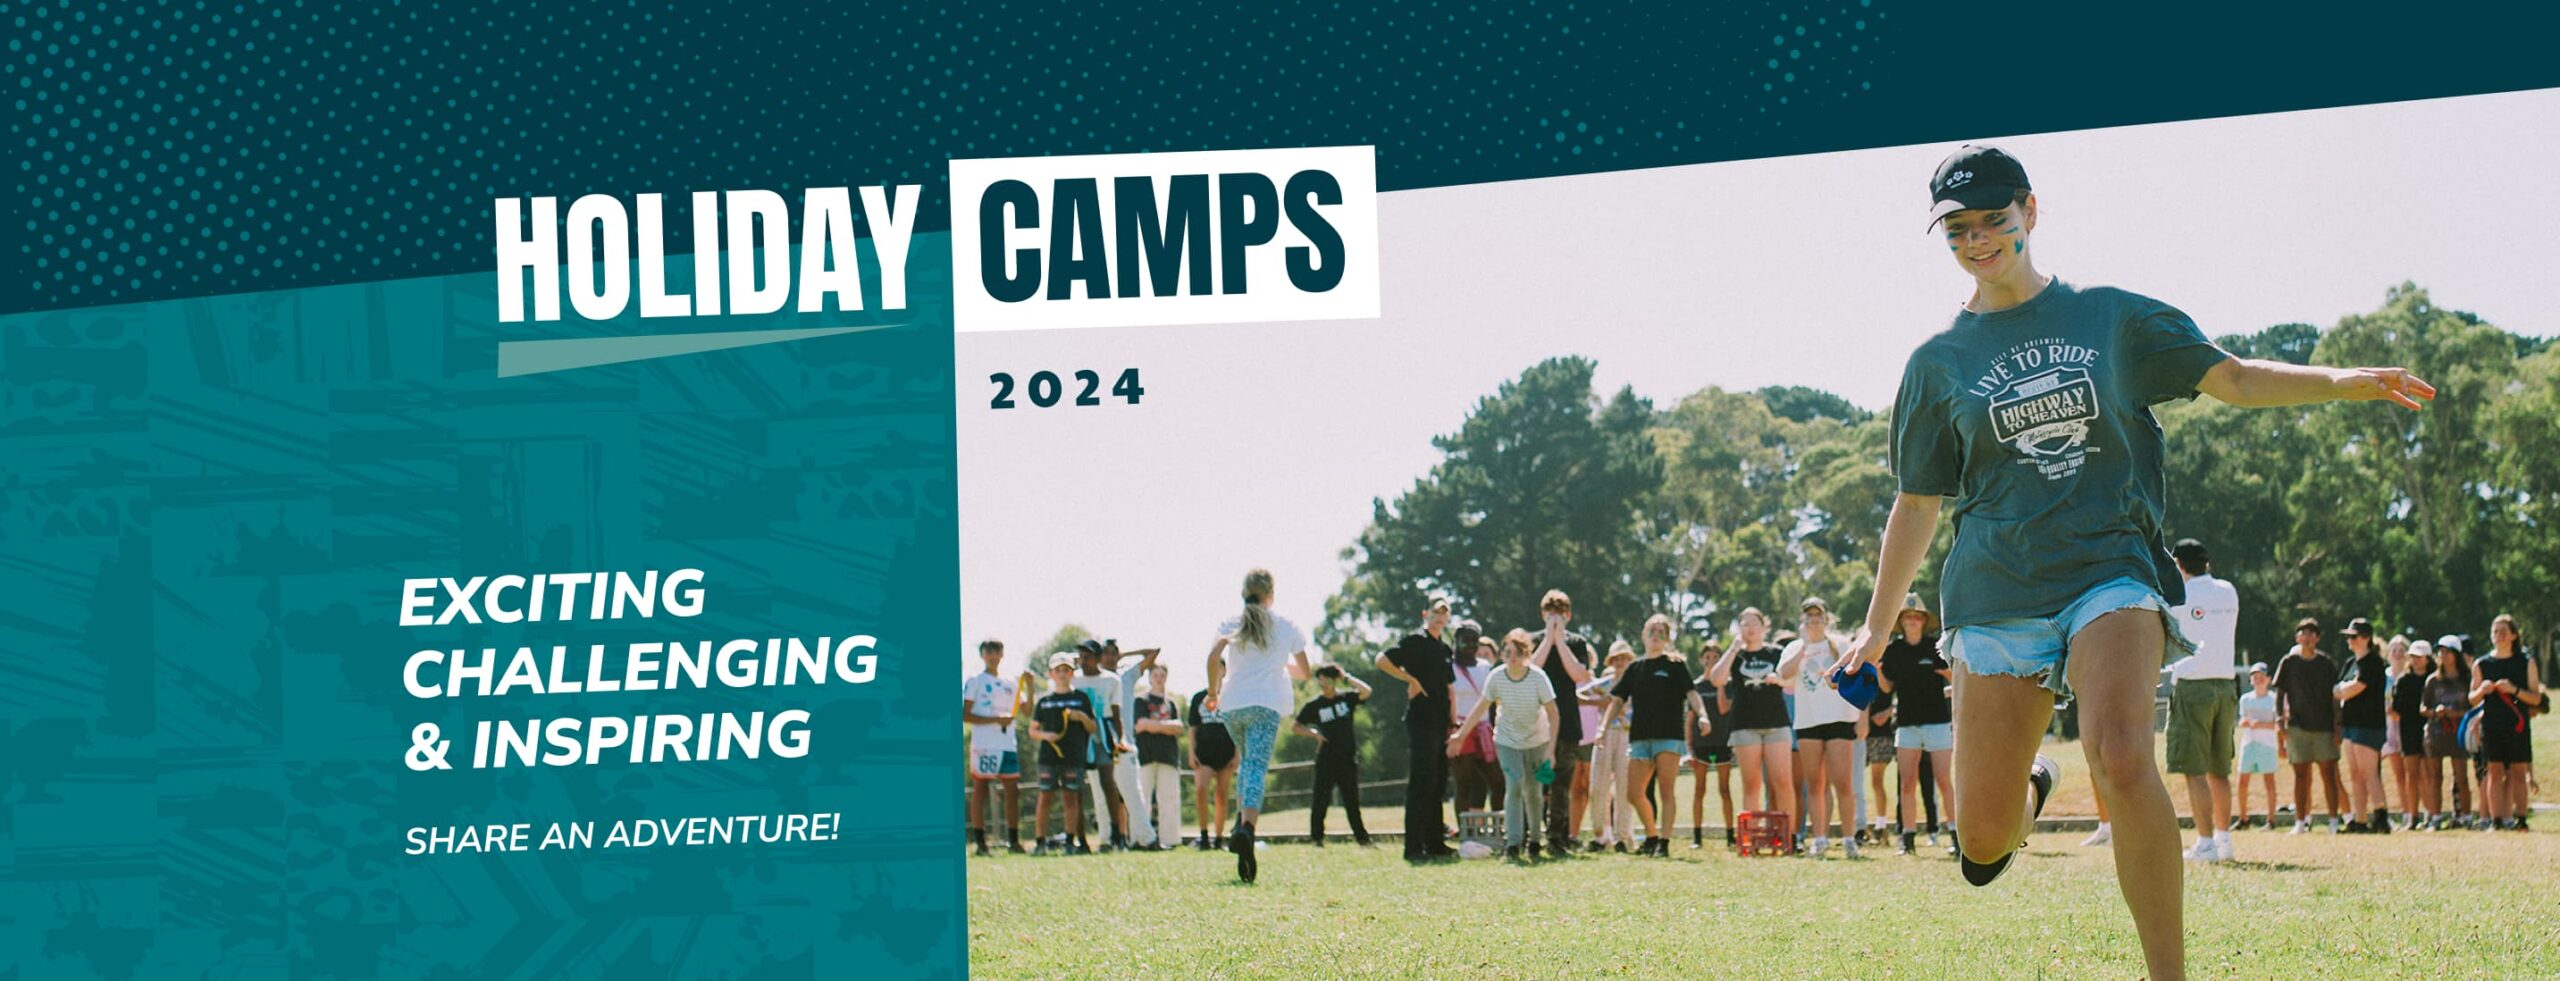 Holiday camps web banner with holiday camps logo, 2024 & the text EXCITING, CHALLENING, INSPIRING. Next to a girl with blue face paint playing field games at Holiday camps on the Mornington Peninsula